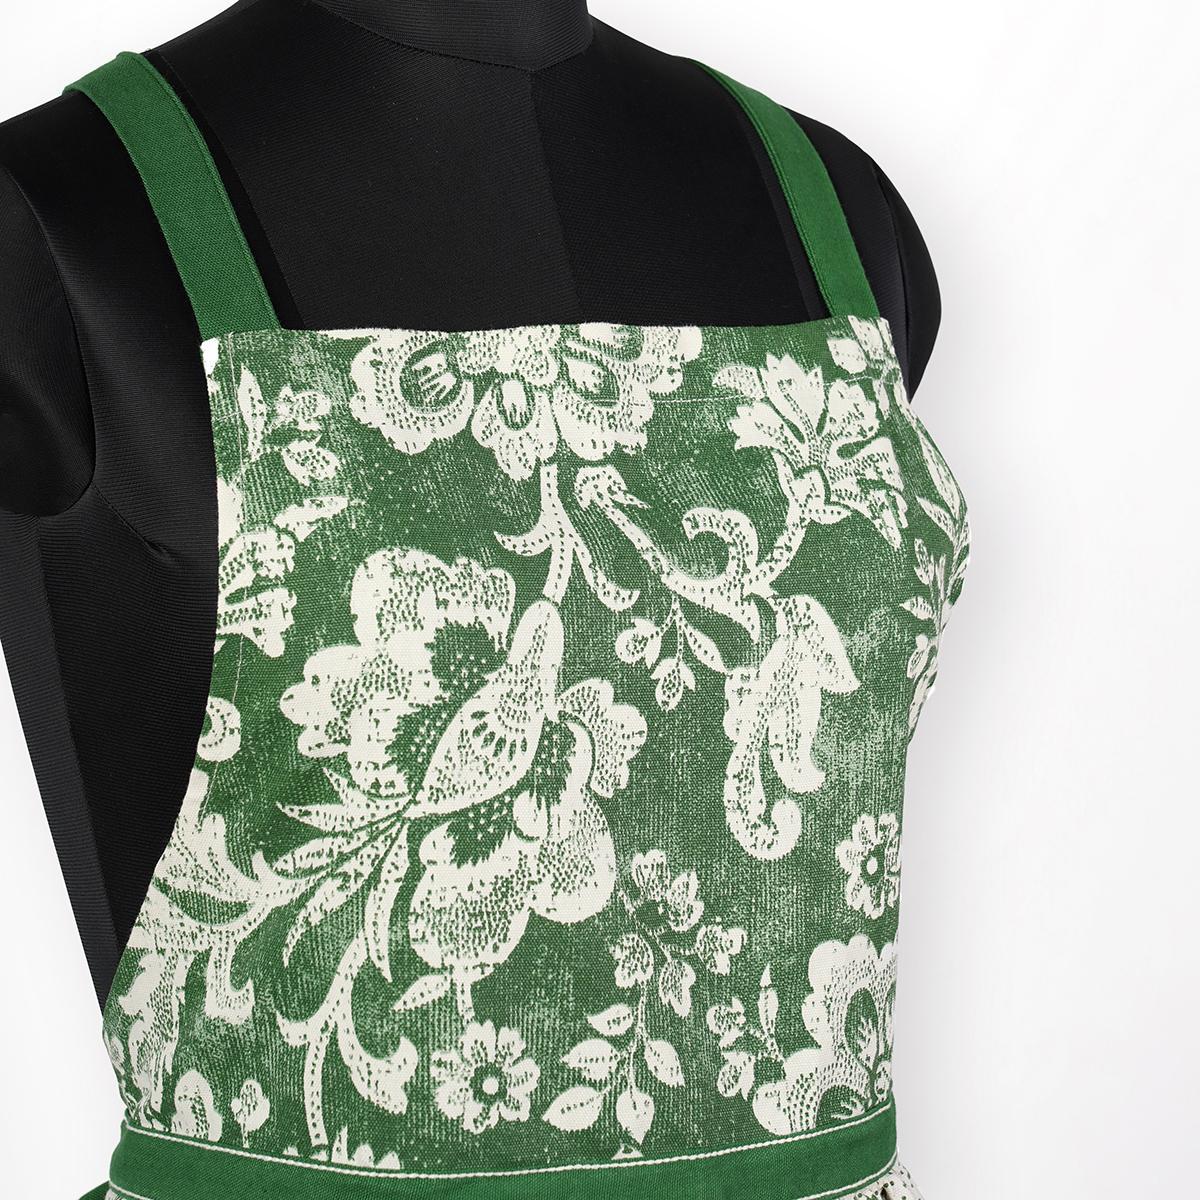 DOMINOTERIE - Green floral print apron, kitchen accessory, 100% cotton, size 27"X 35"